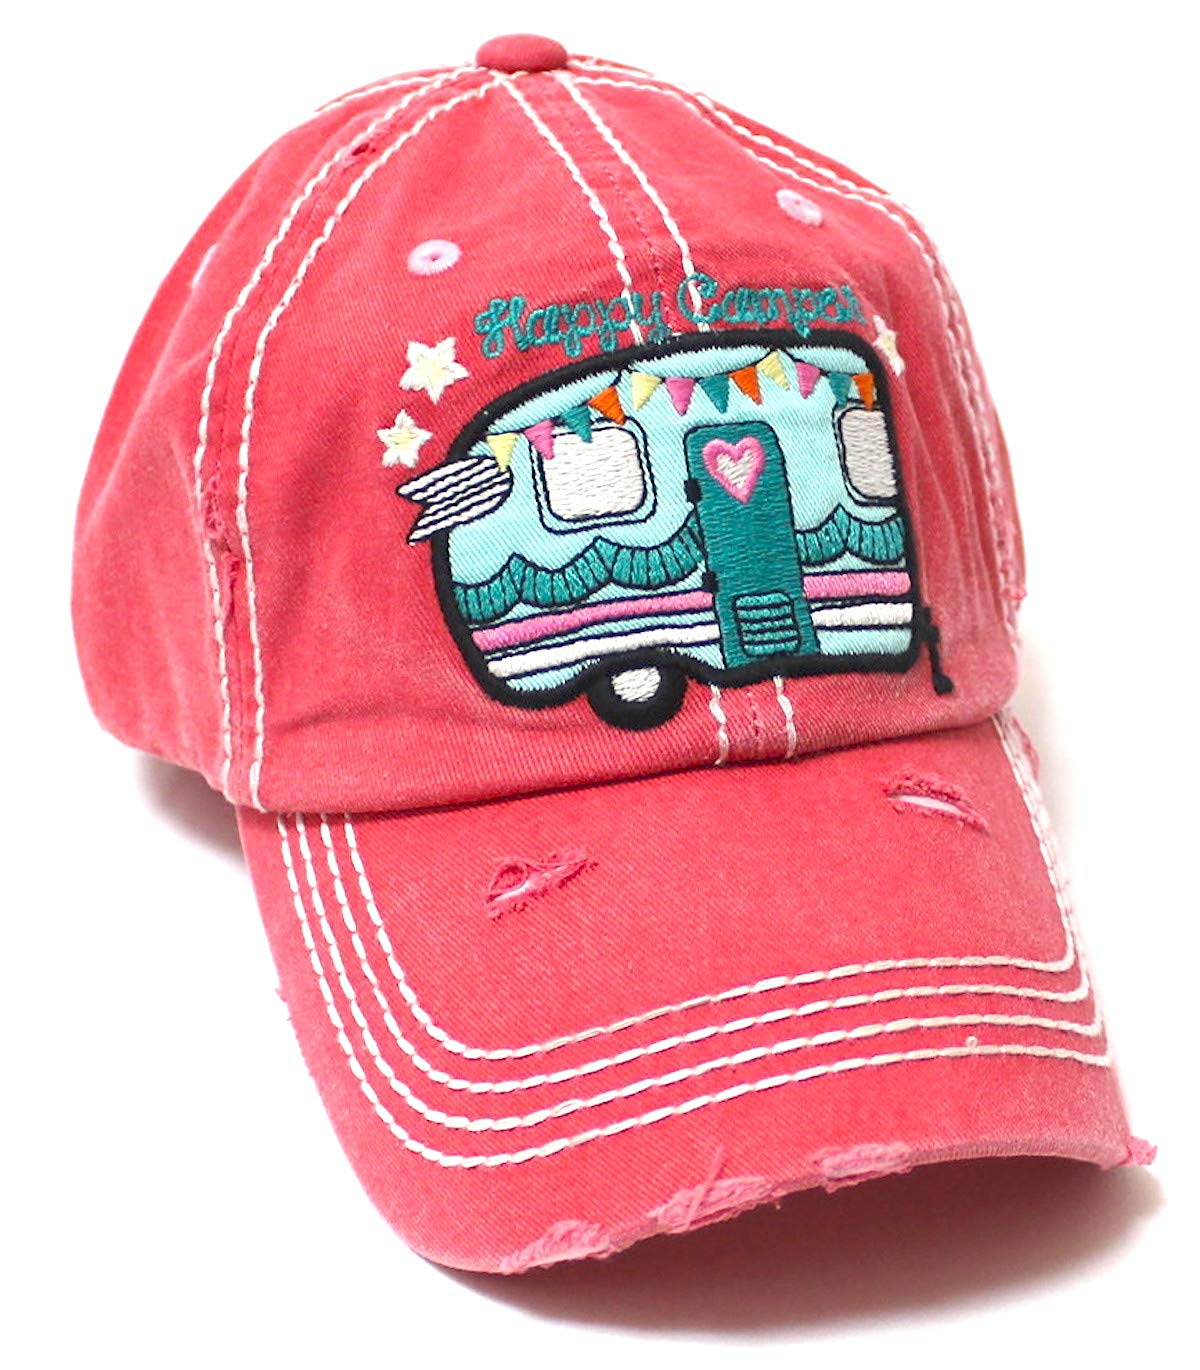 Camping Ballcap Happy Camper RV Truck, Hearts & Stars Patch Embroidery Hat, Rose Pink - Caps 'N Vintage 